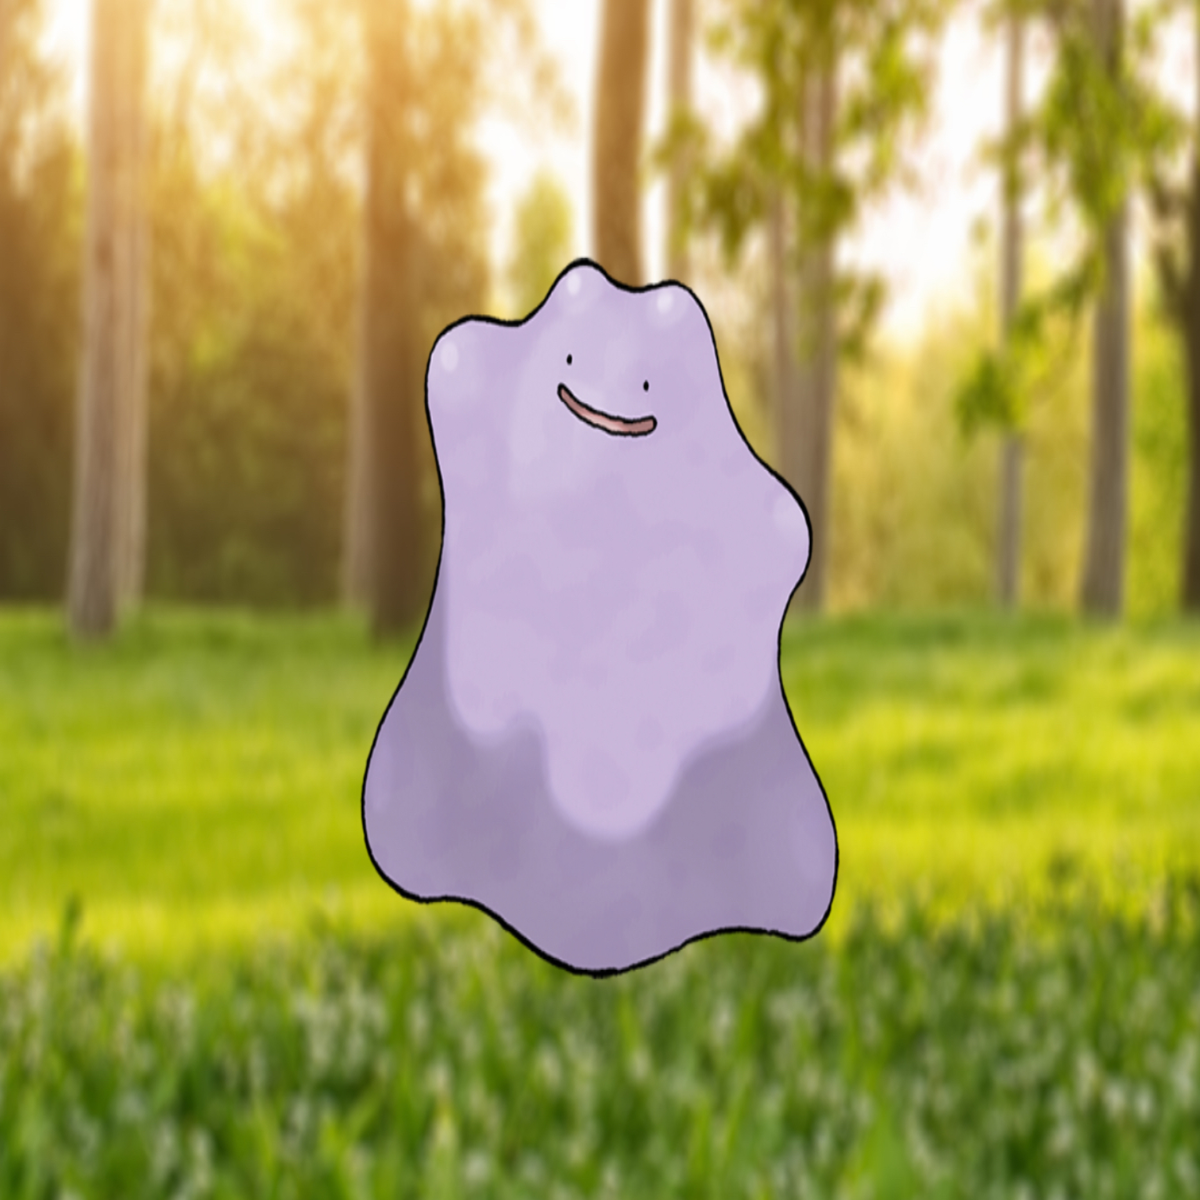 Pokemon Scarlet & Violet player finds Ditto disguised as itself - Dexerto